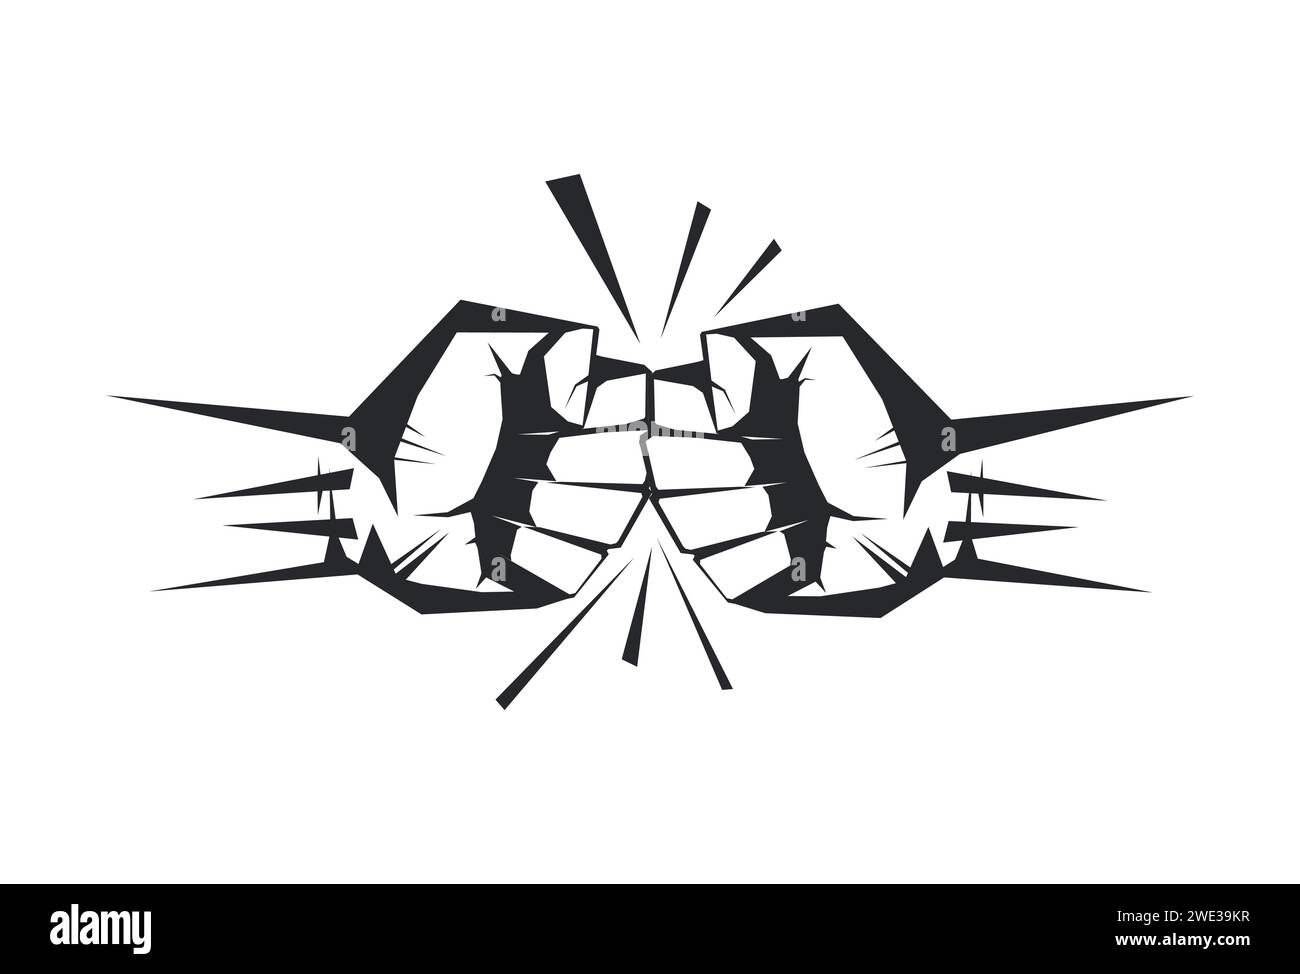 Two clenched fists bumping together. The concept of conflict, confrontation, resistance, competition, struggle. Hand drawn isolated on white backgroun Stock Vector